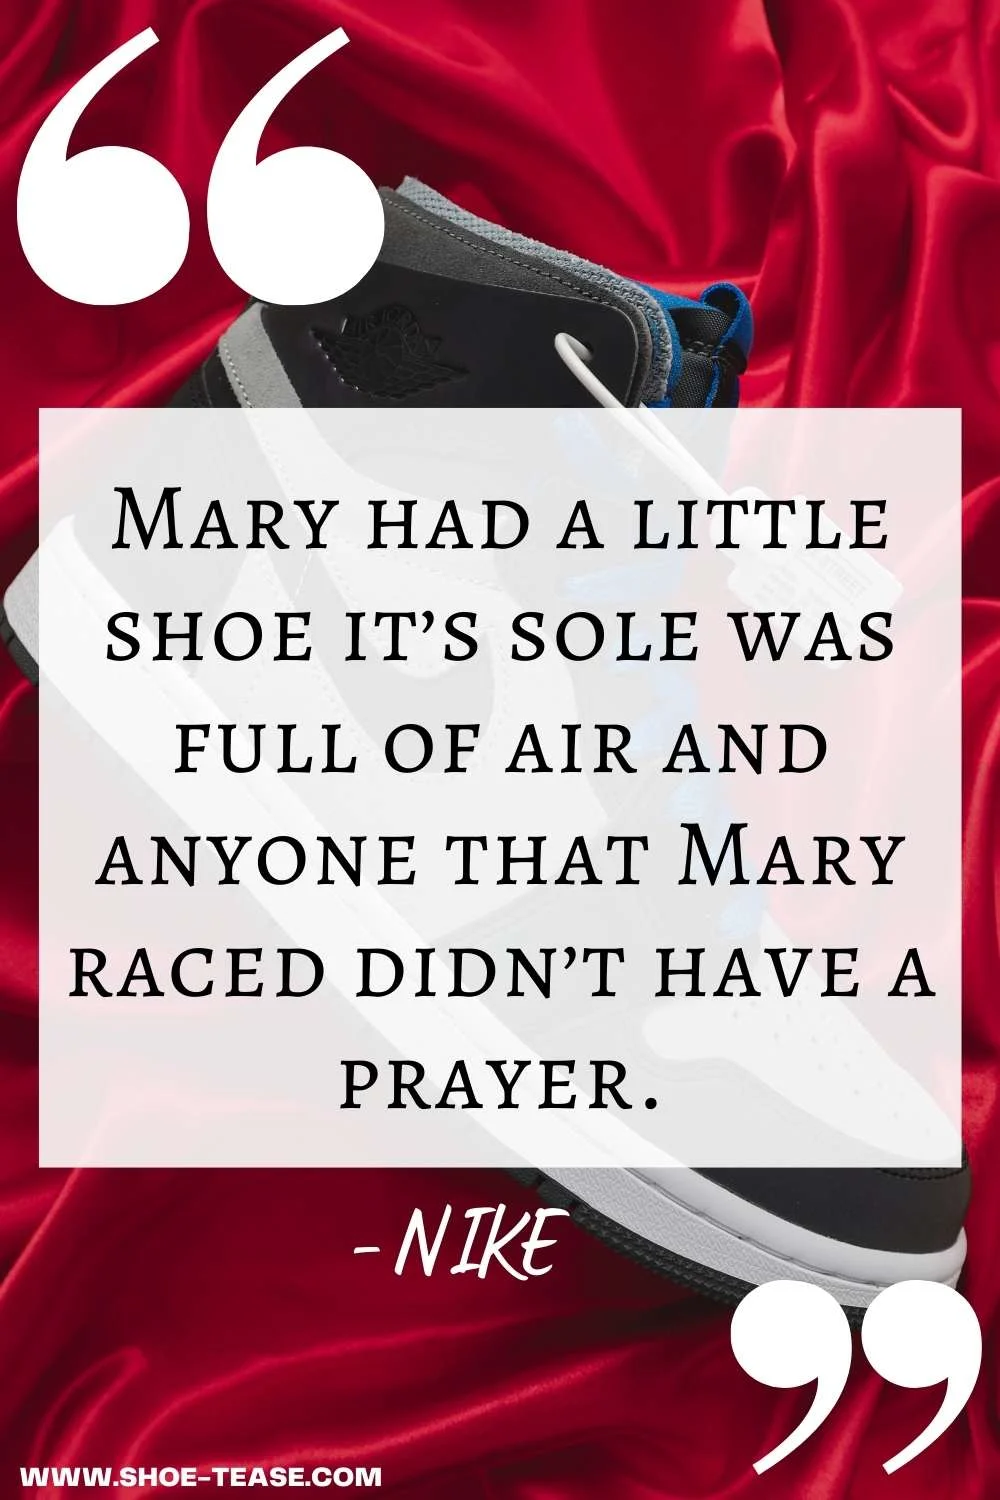 Nike Quote reading Mary had a little shoe it's sole was full of air and anyone that Mary raced didn't have a prayer over 1 black sneaker.